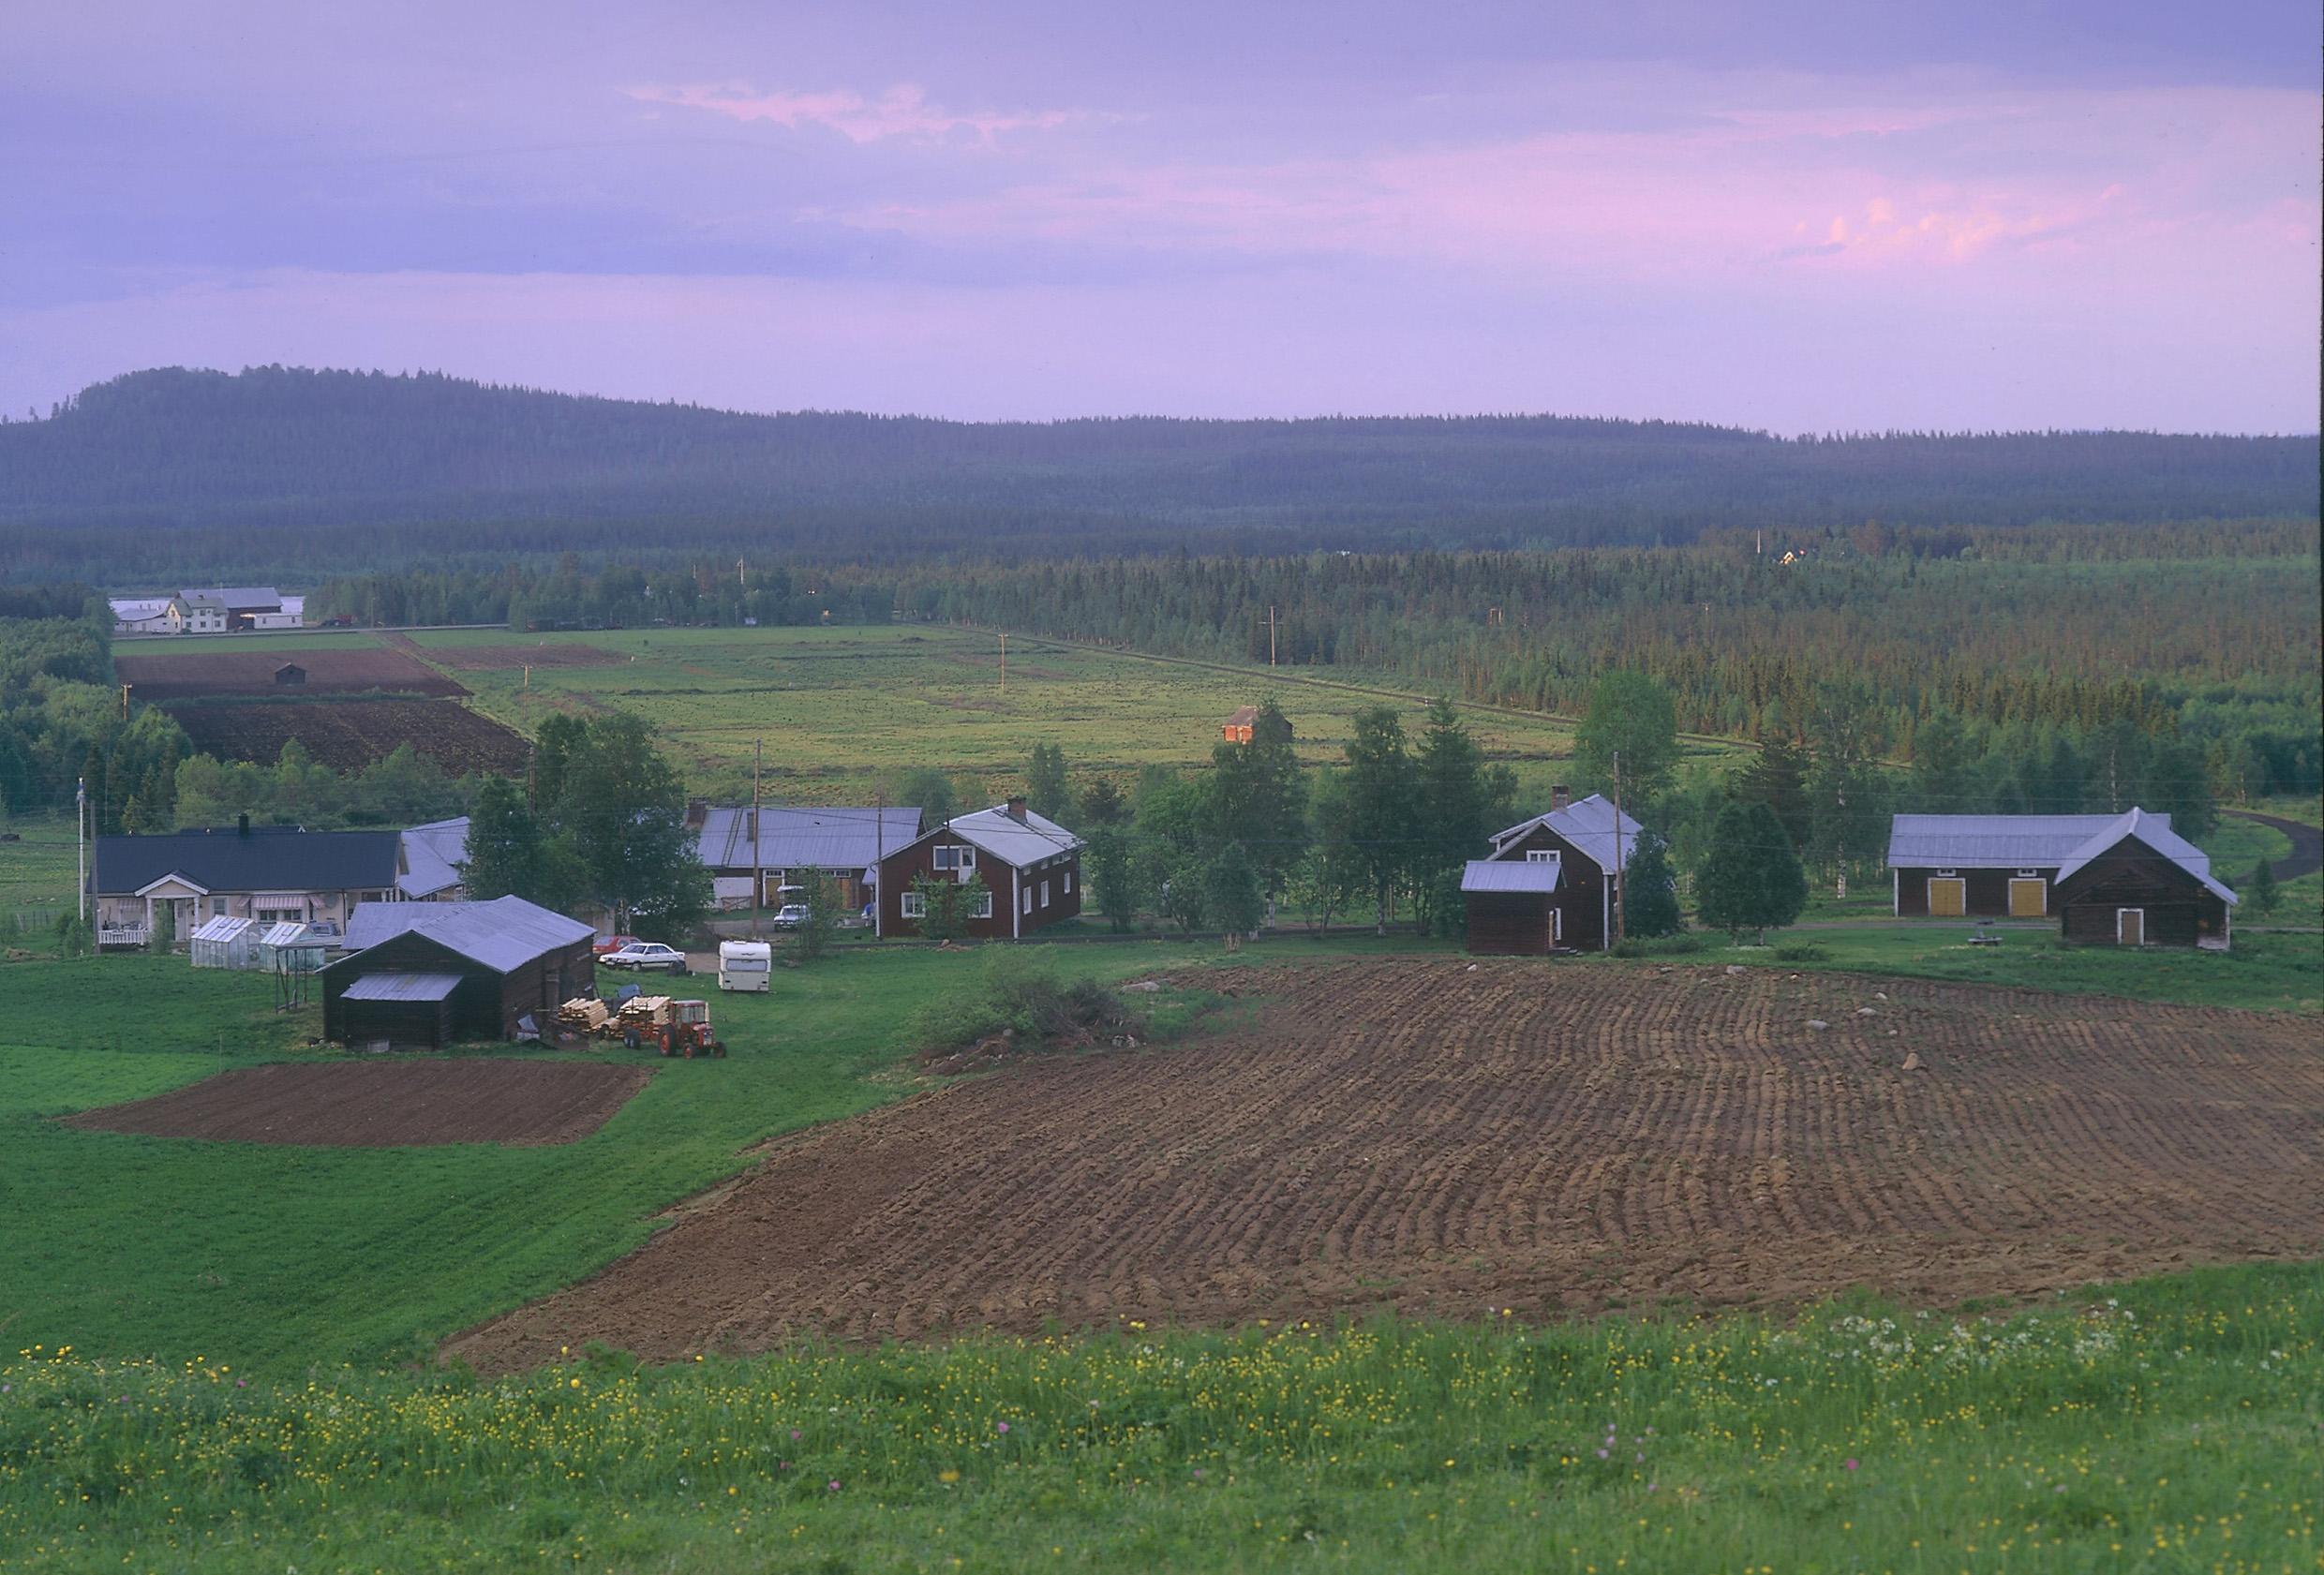 A countryside landscape with a few houses among fields and some trees.